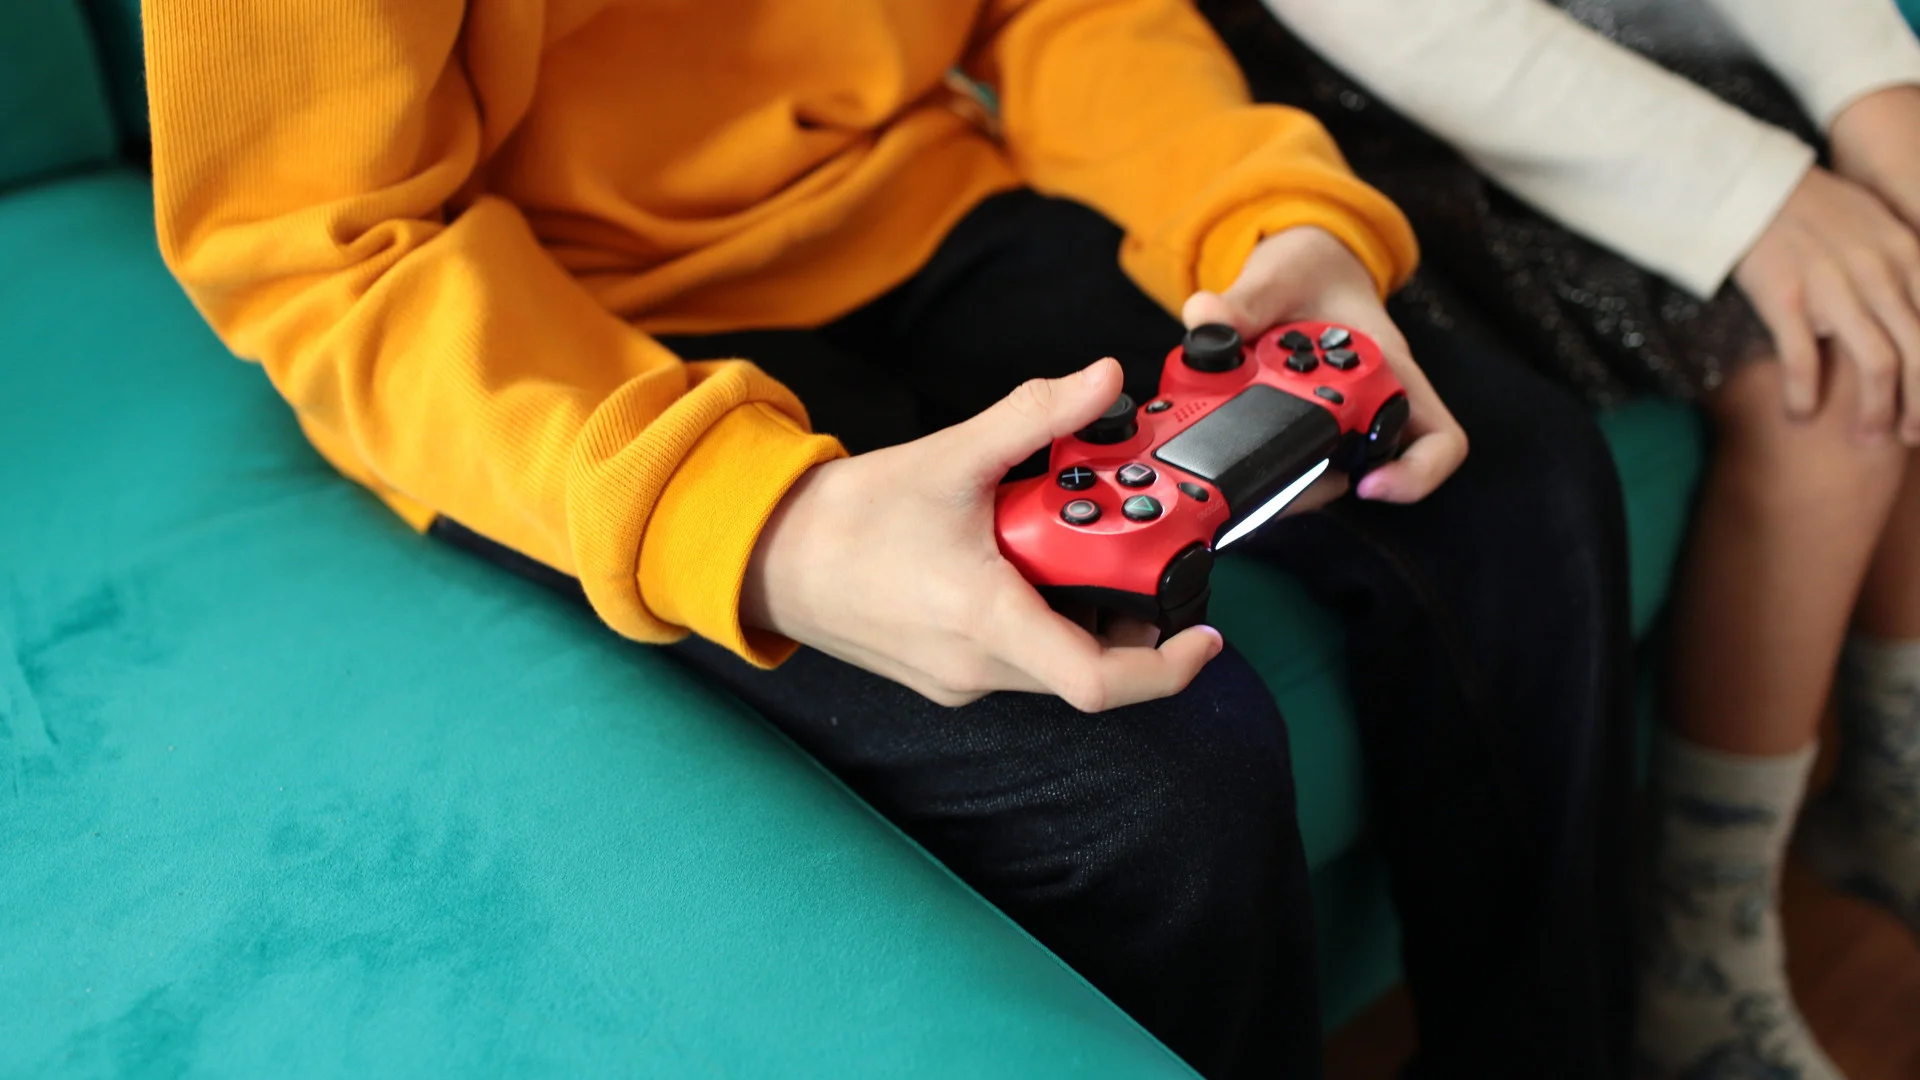 Swedish scientists have found that video games increase IQ in children